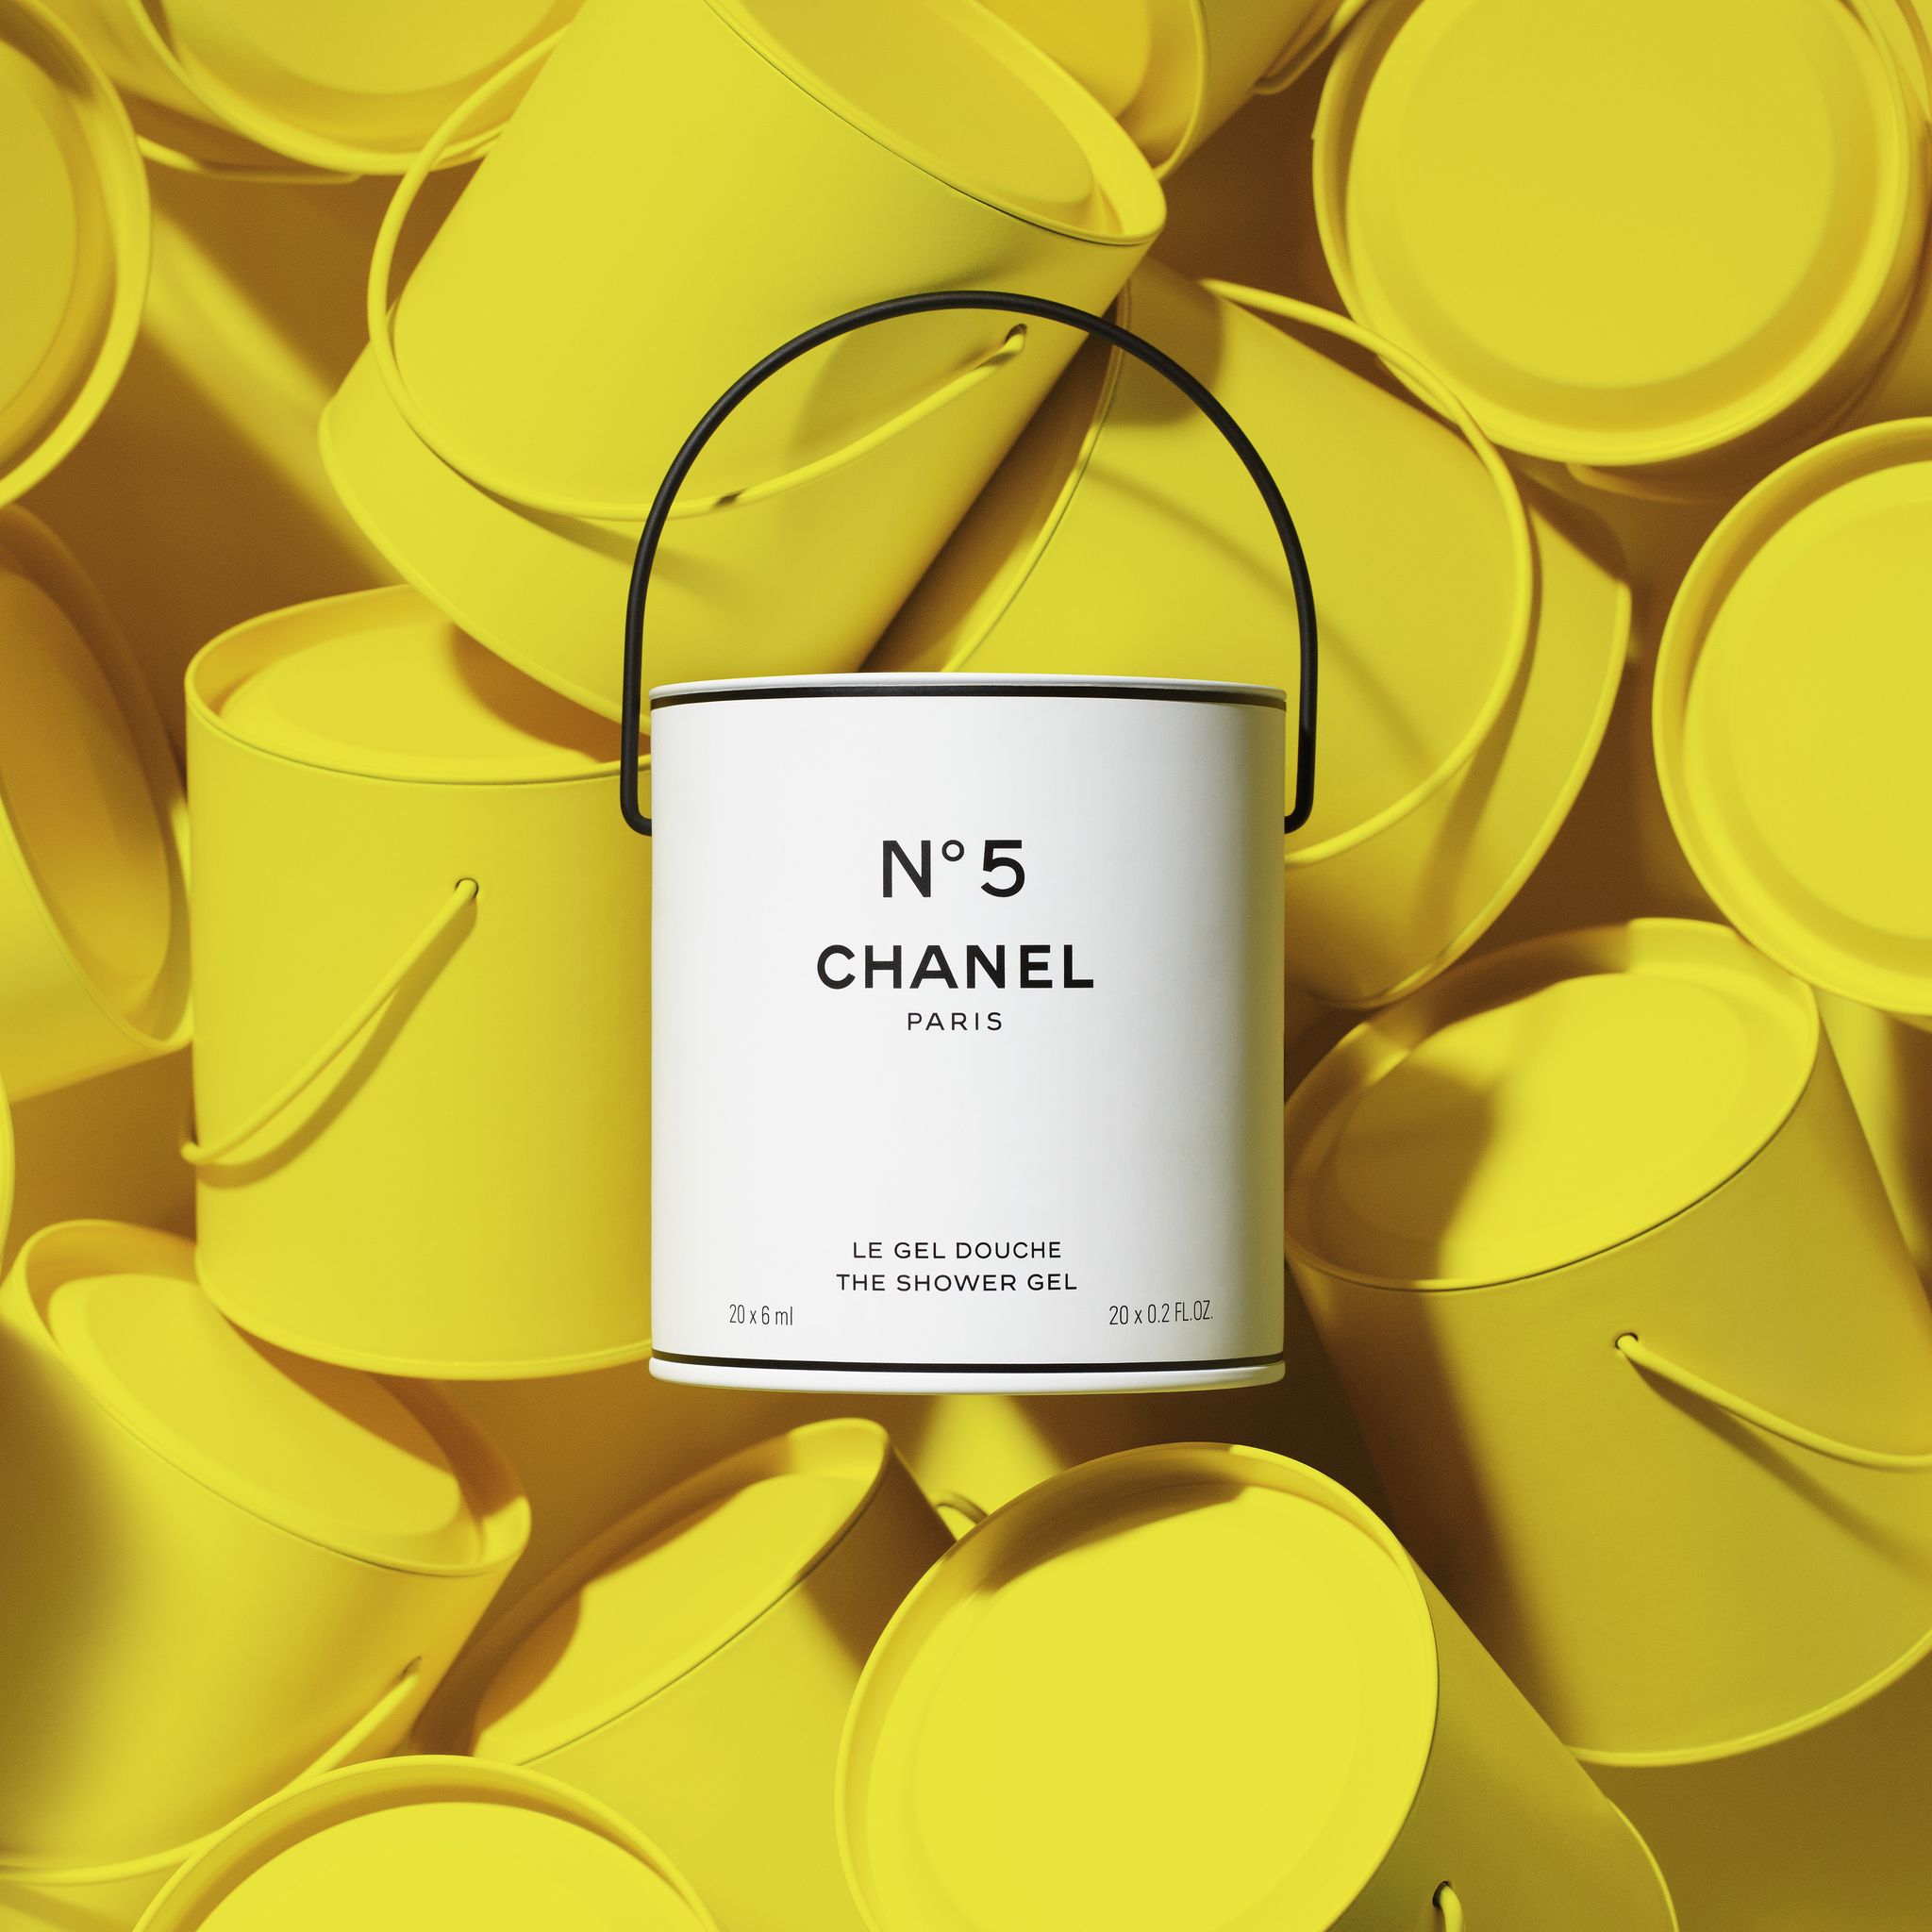 Chanel celebrate 100th anniversary of No. 5 with Chanel Factory 5